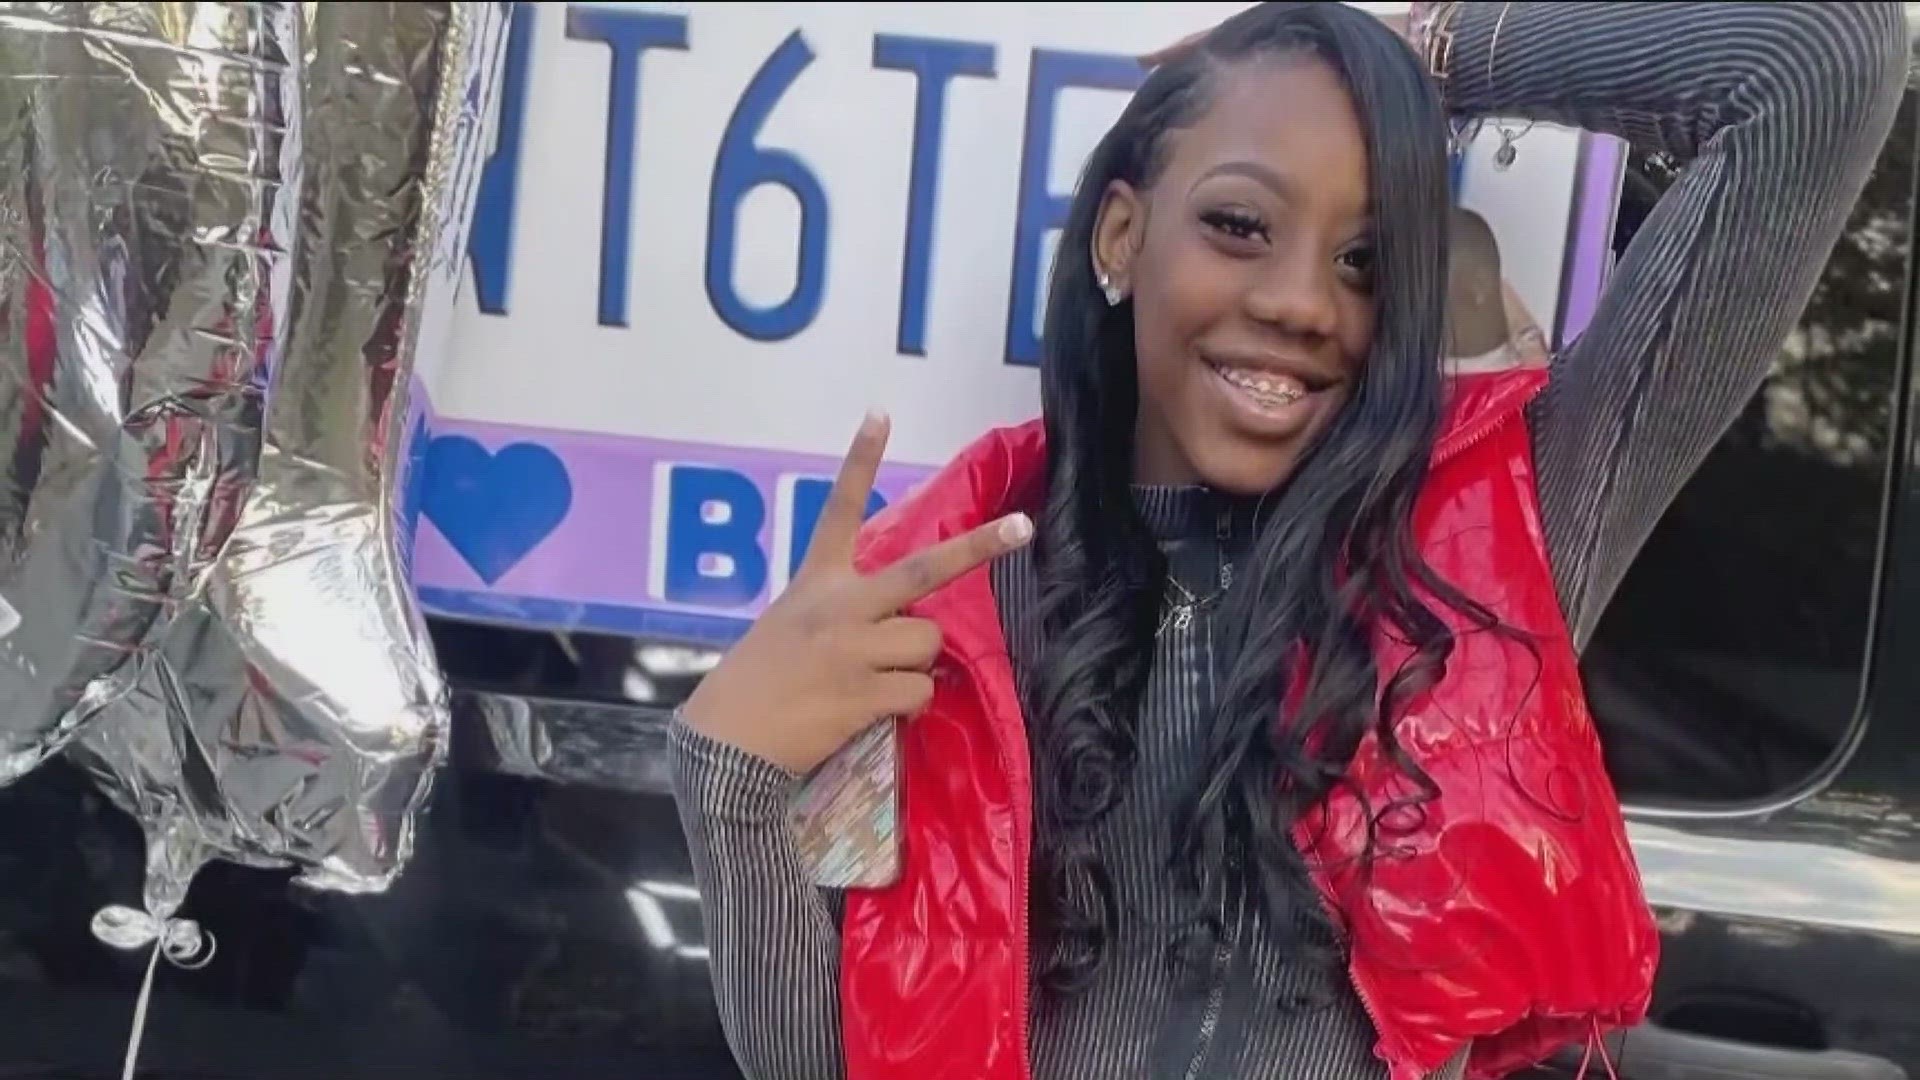 Family and friends will gather to remember 16-year-old Bre'Asia Powell, who was shot and killed.